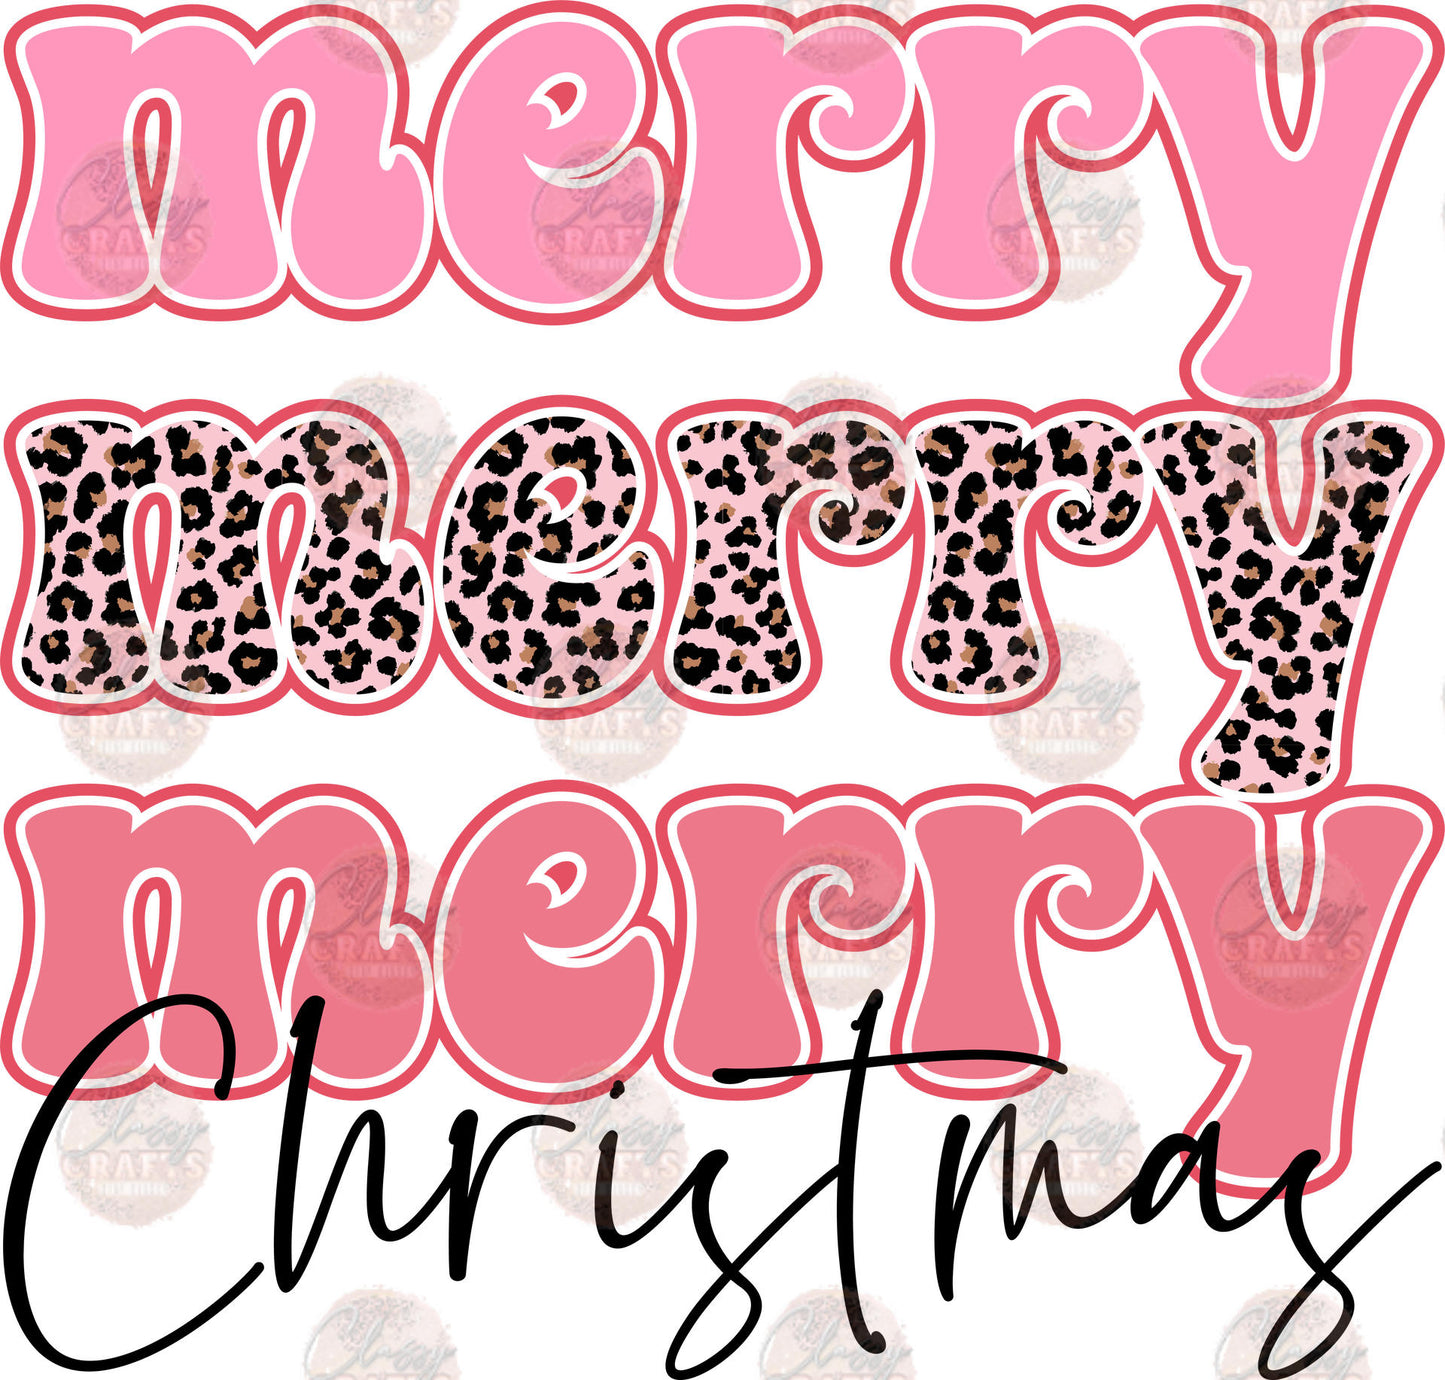 Merry Merry Merry Christmas Pink Leopard - Sublimation Transfer